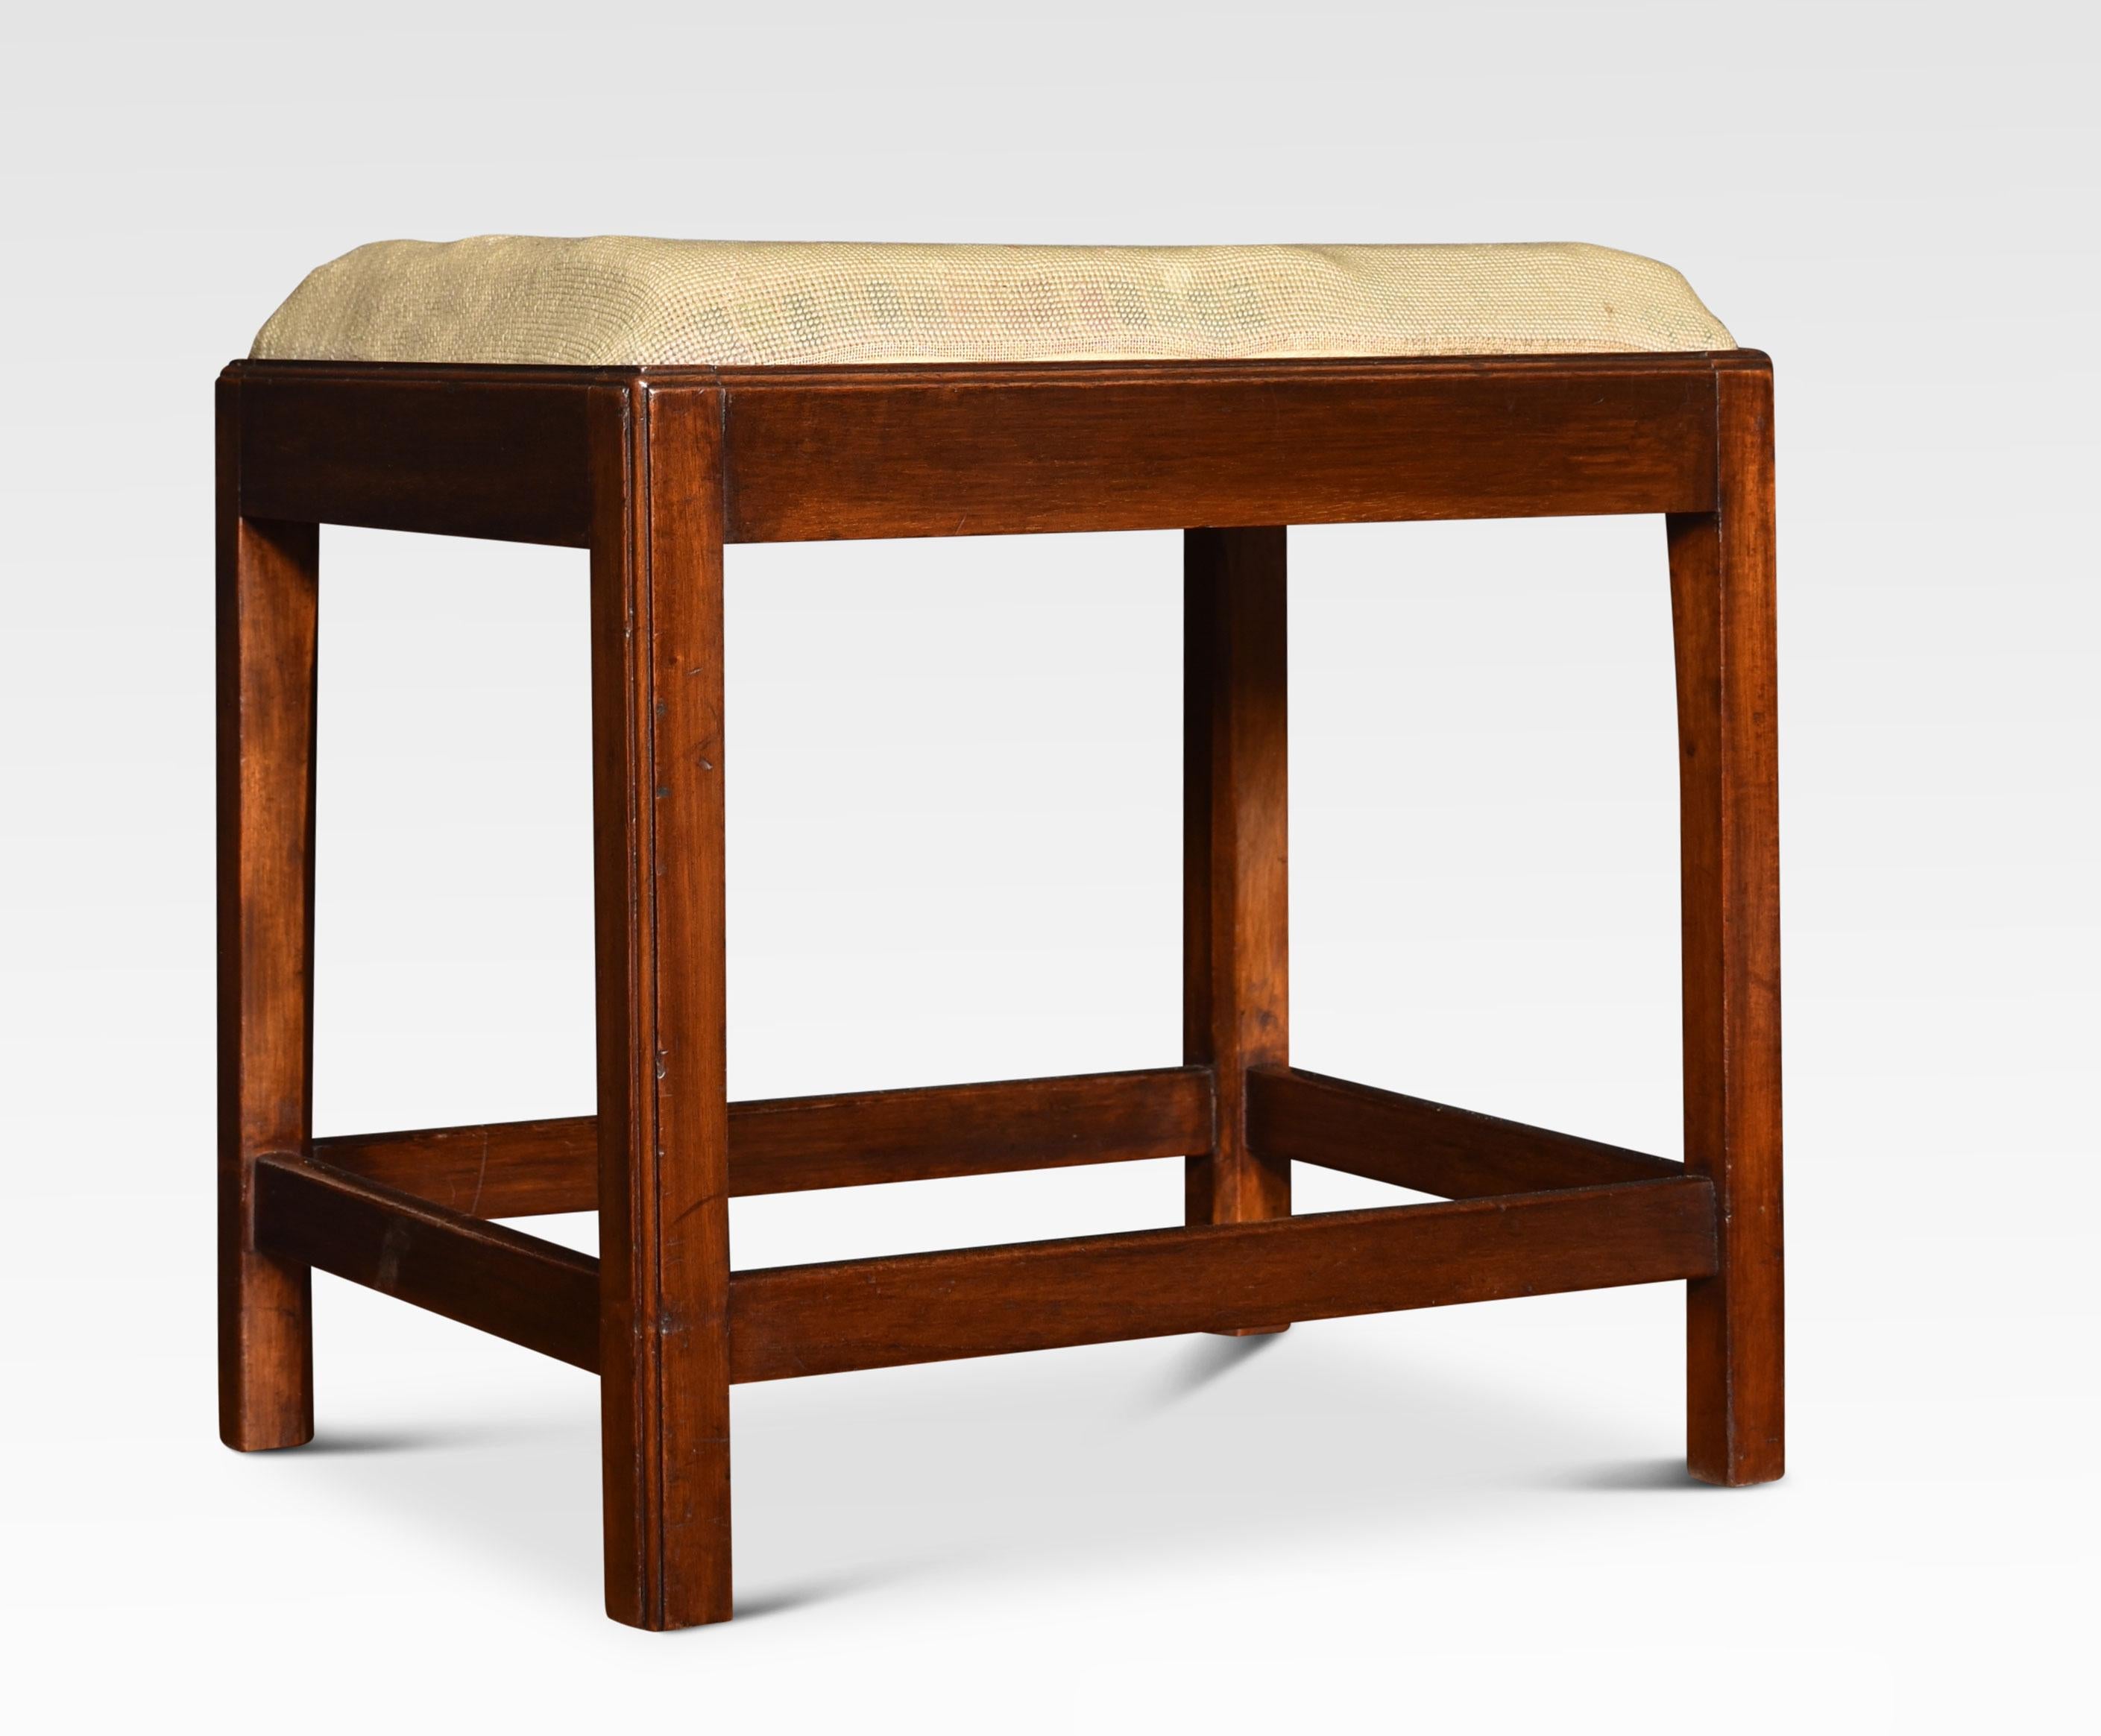 19th-century mahogany framed stool, the square top with floral needlepoint seat, raised up on square sports united by stretchers.
Dimensions
Height 19.5 Inches
Width 20 Inches
Depth 16 Inches.